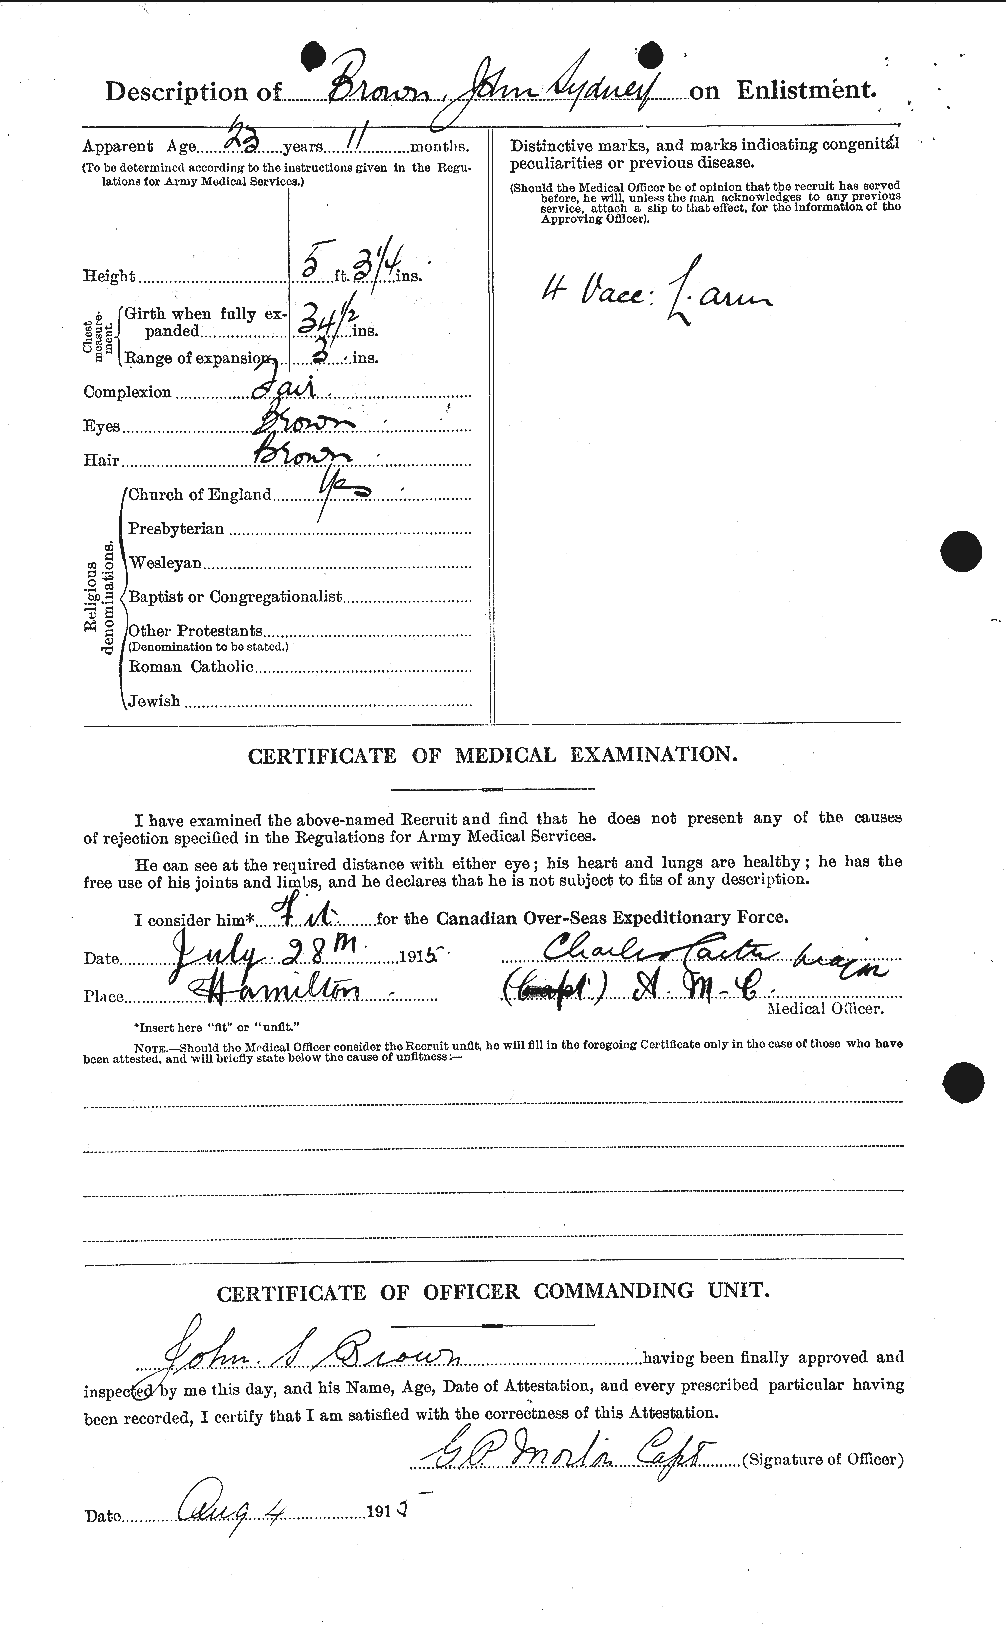 Personnel Records of the First World War - CEF 265880b